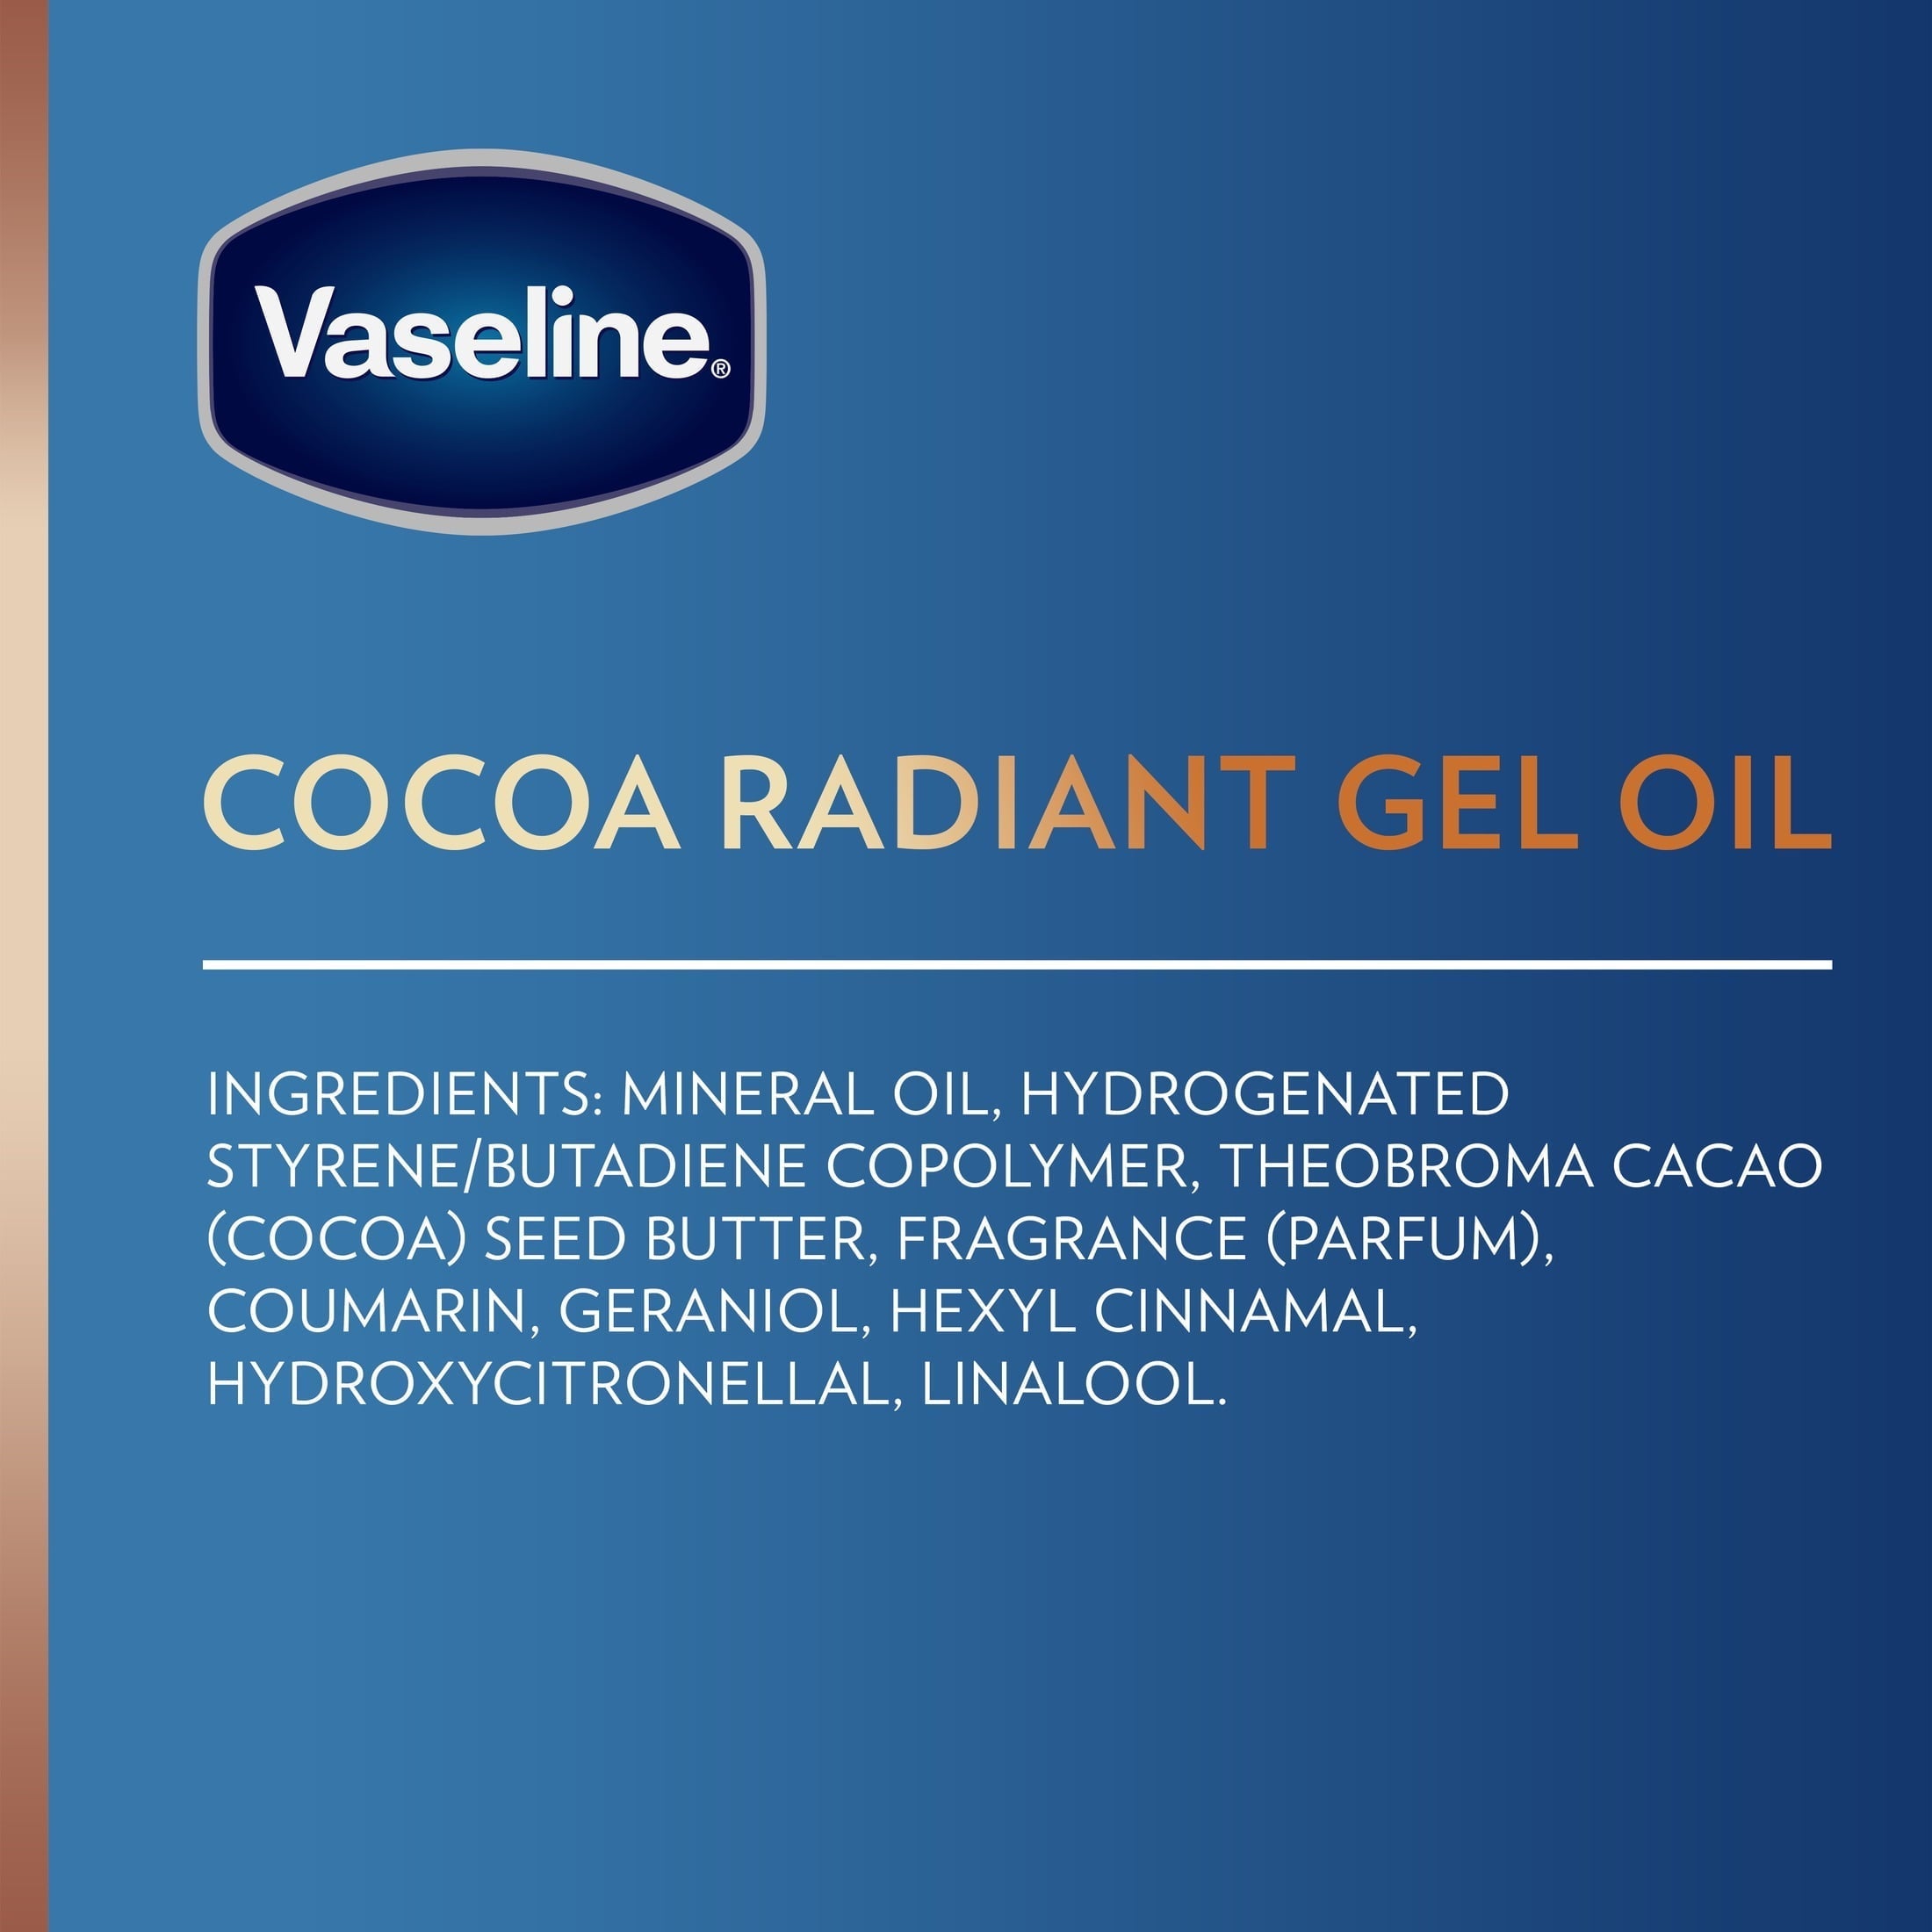 Wholesale prices with free shipping all over United States Vaseline Intensive Care Cocoa Radiant for Glowing Skin, 6.8 oz - Steven Deals